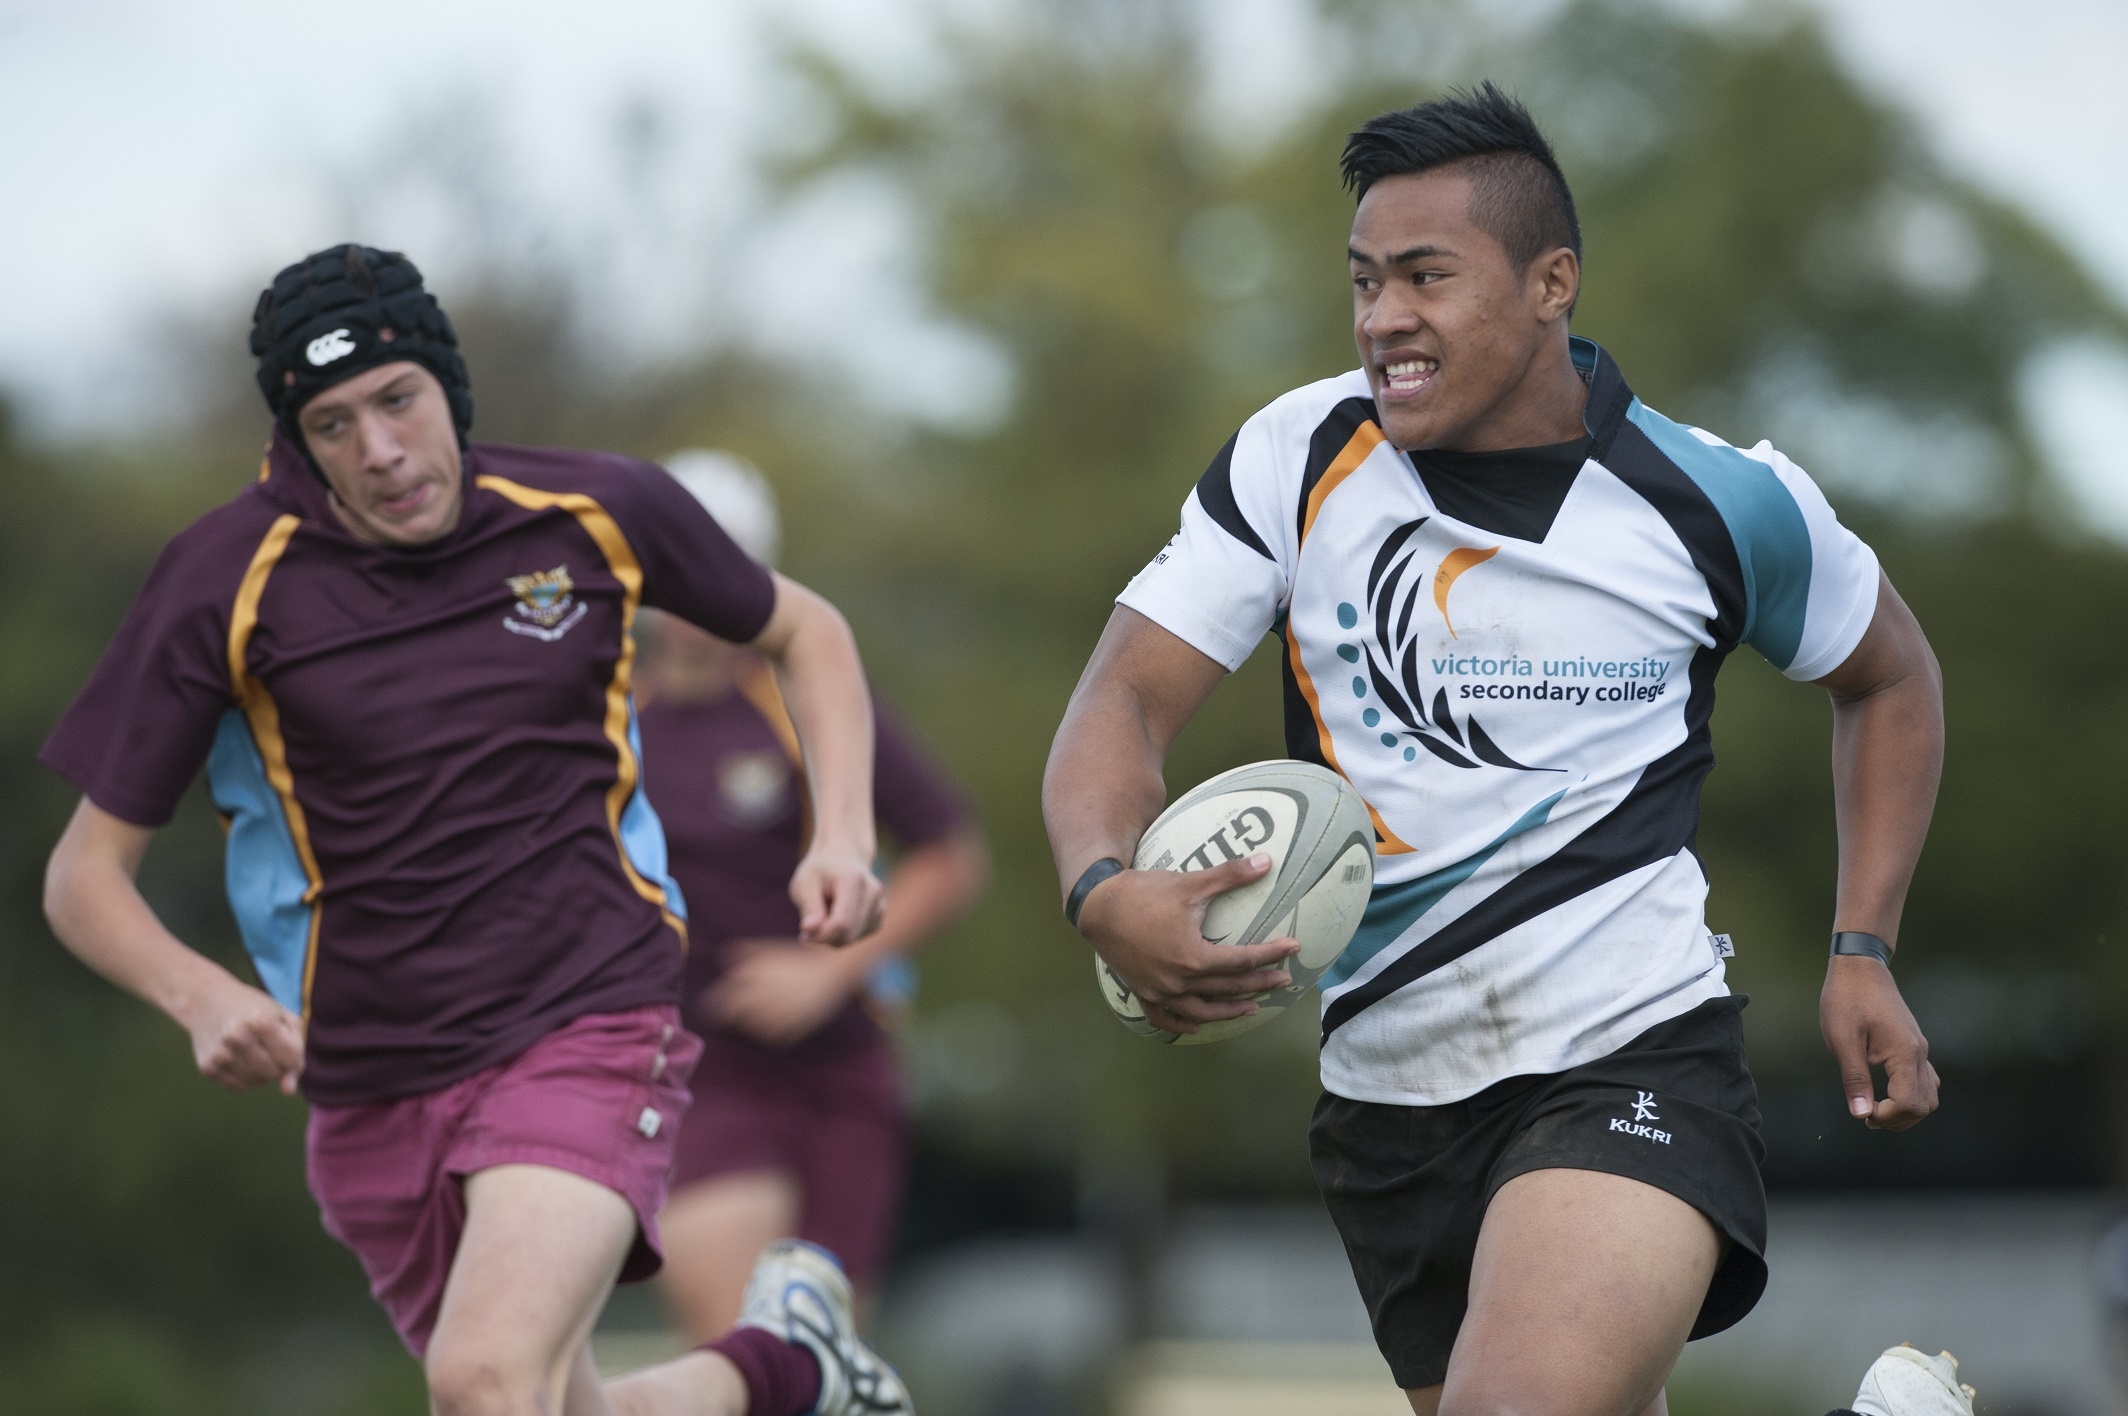 Rugby League: Victoria University Secondary College footballer holds a ball during the game. 2130x1420 HD Background.